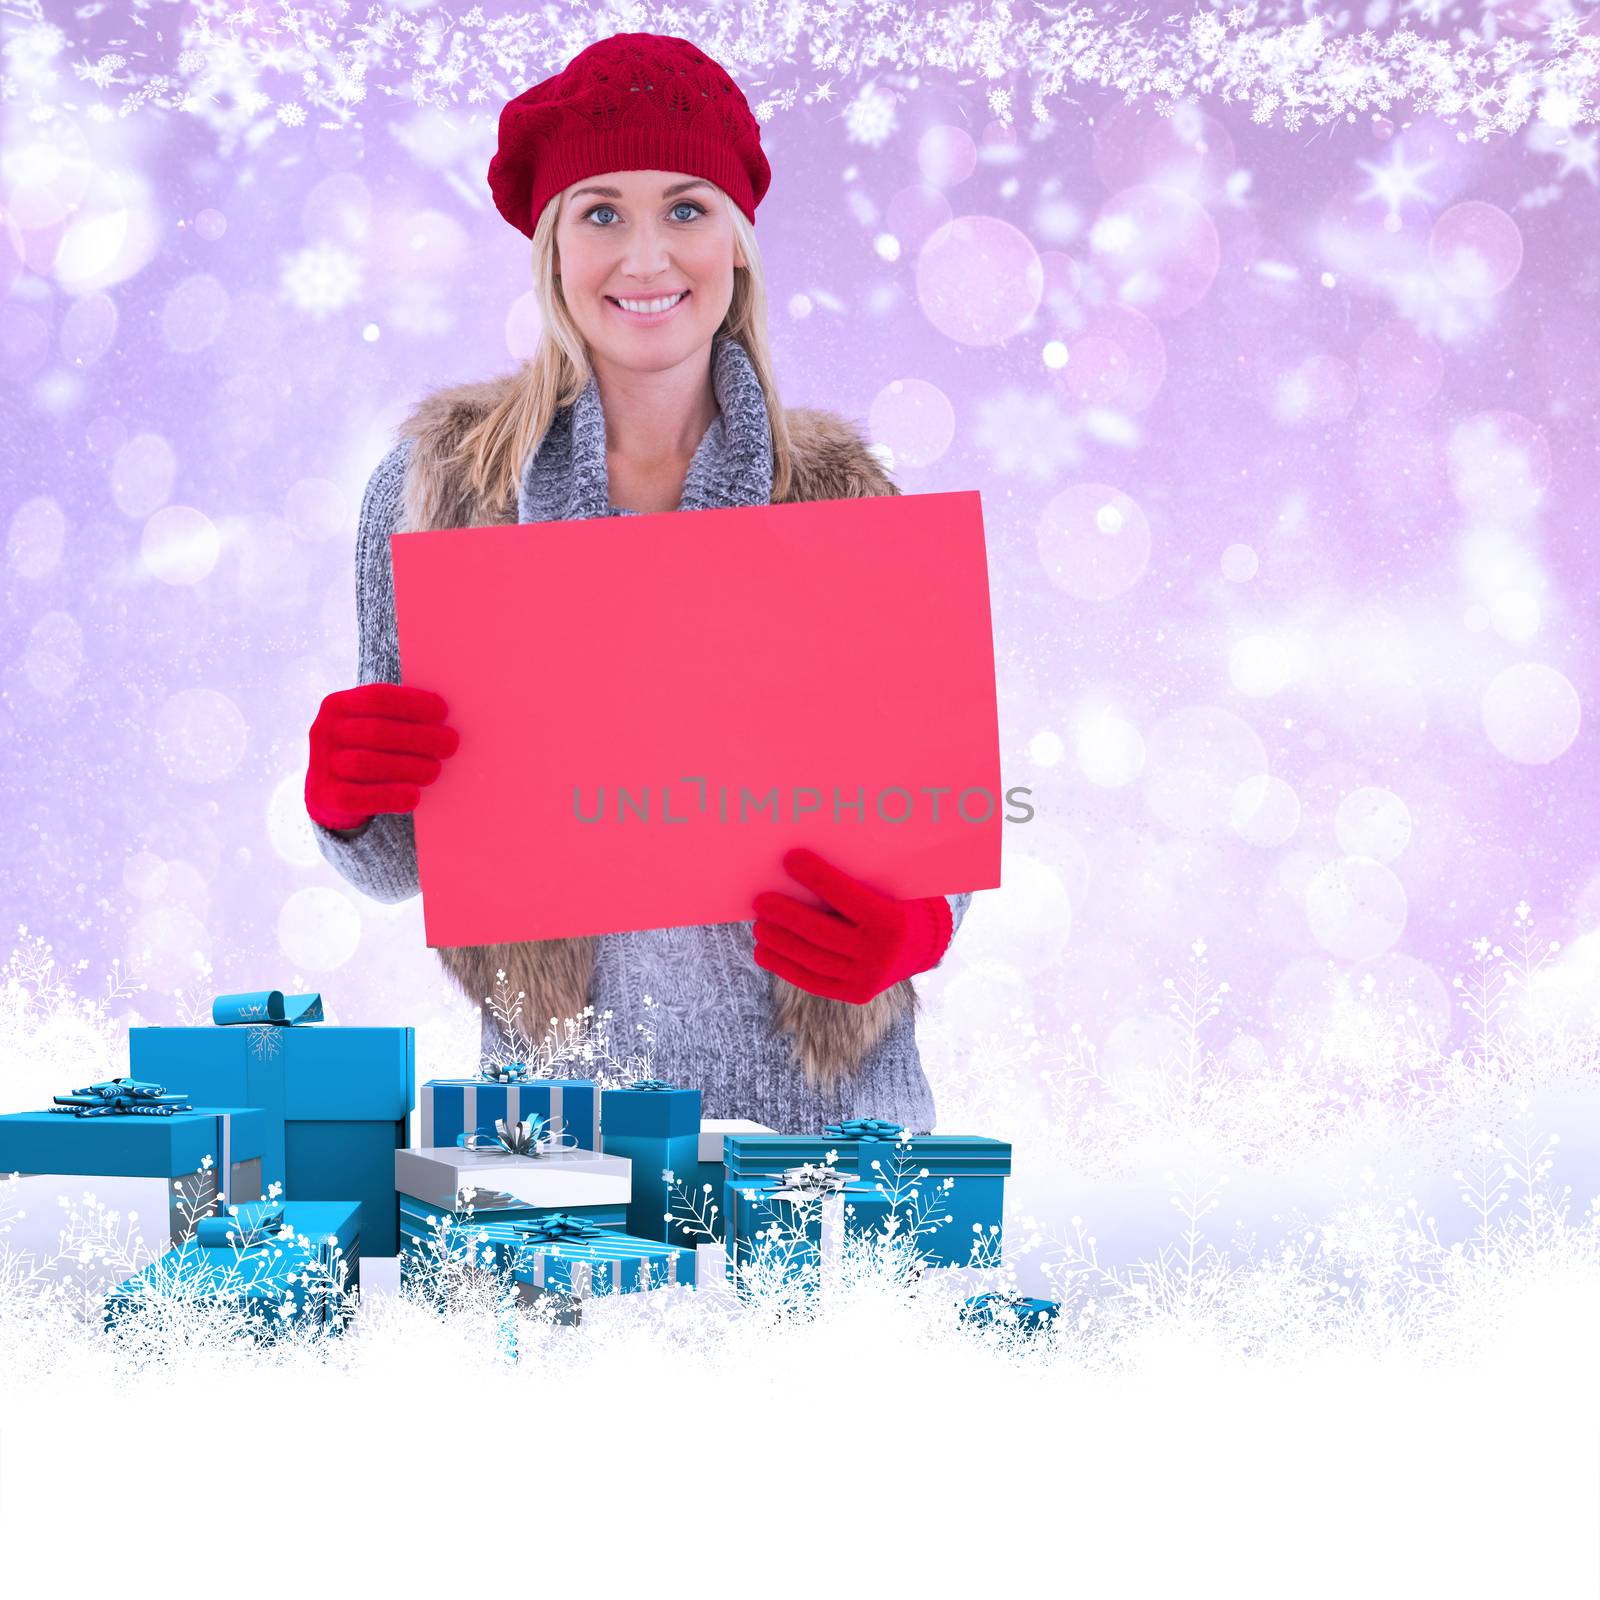 Blonde in winter clothes holding red sign against purple abstract light spot design